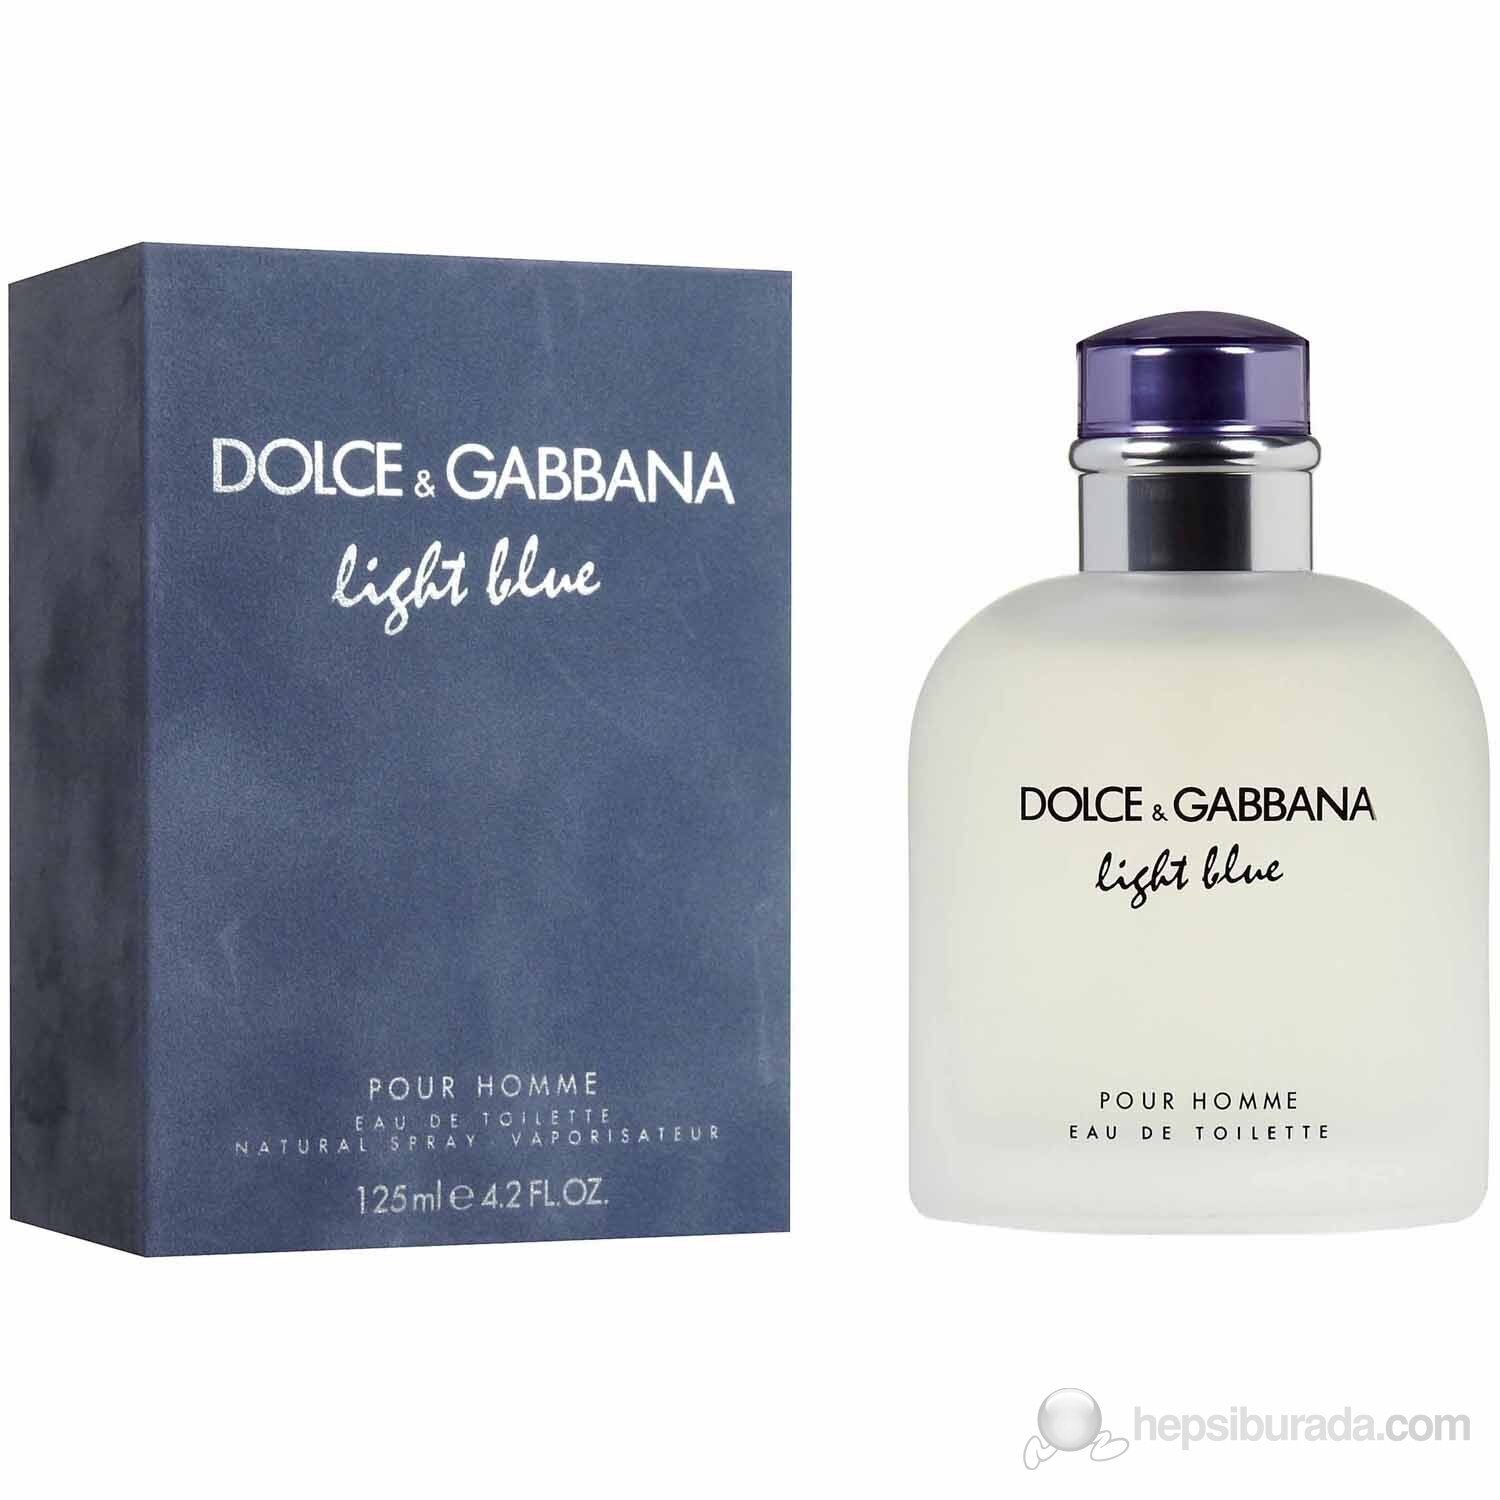 Dolce gabbana forever pour homme. Dolce Gabbana Light Blue 125ml. Dolce & Gabbana Light Blue pour homme EDT, 125 ml. Dolce Gabbana Light Blue мужские 125. Dolce & Gabbana Light Blue 125 мл.